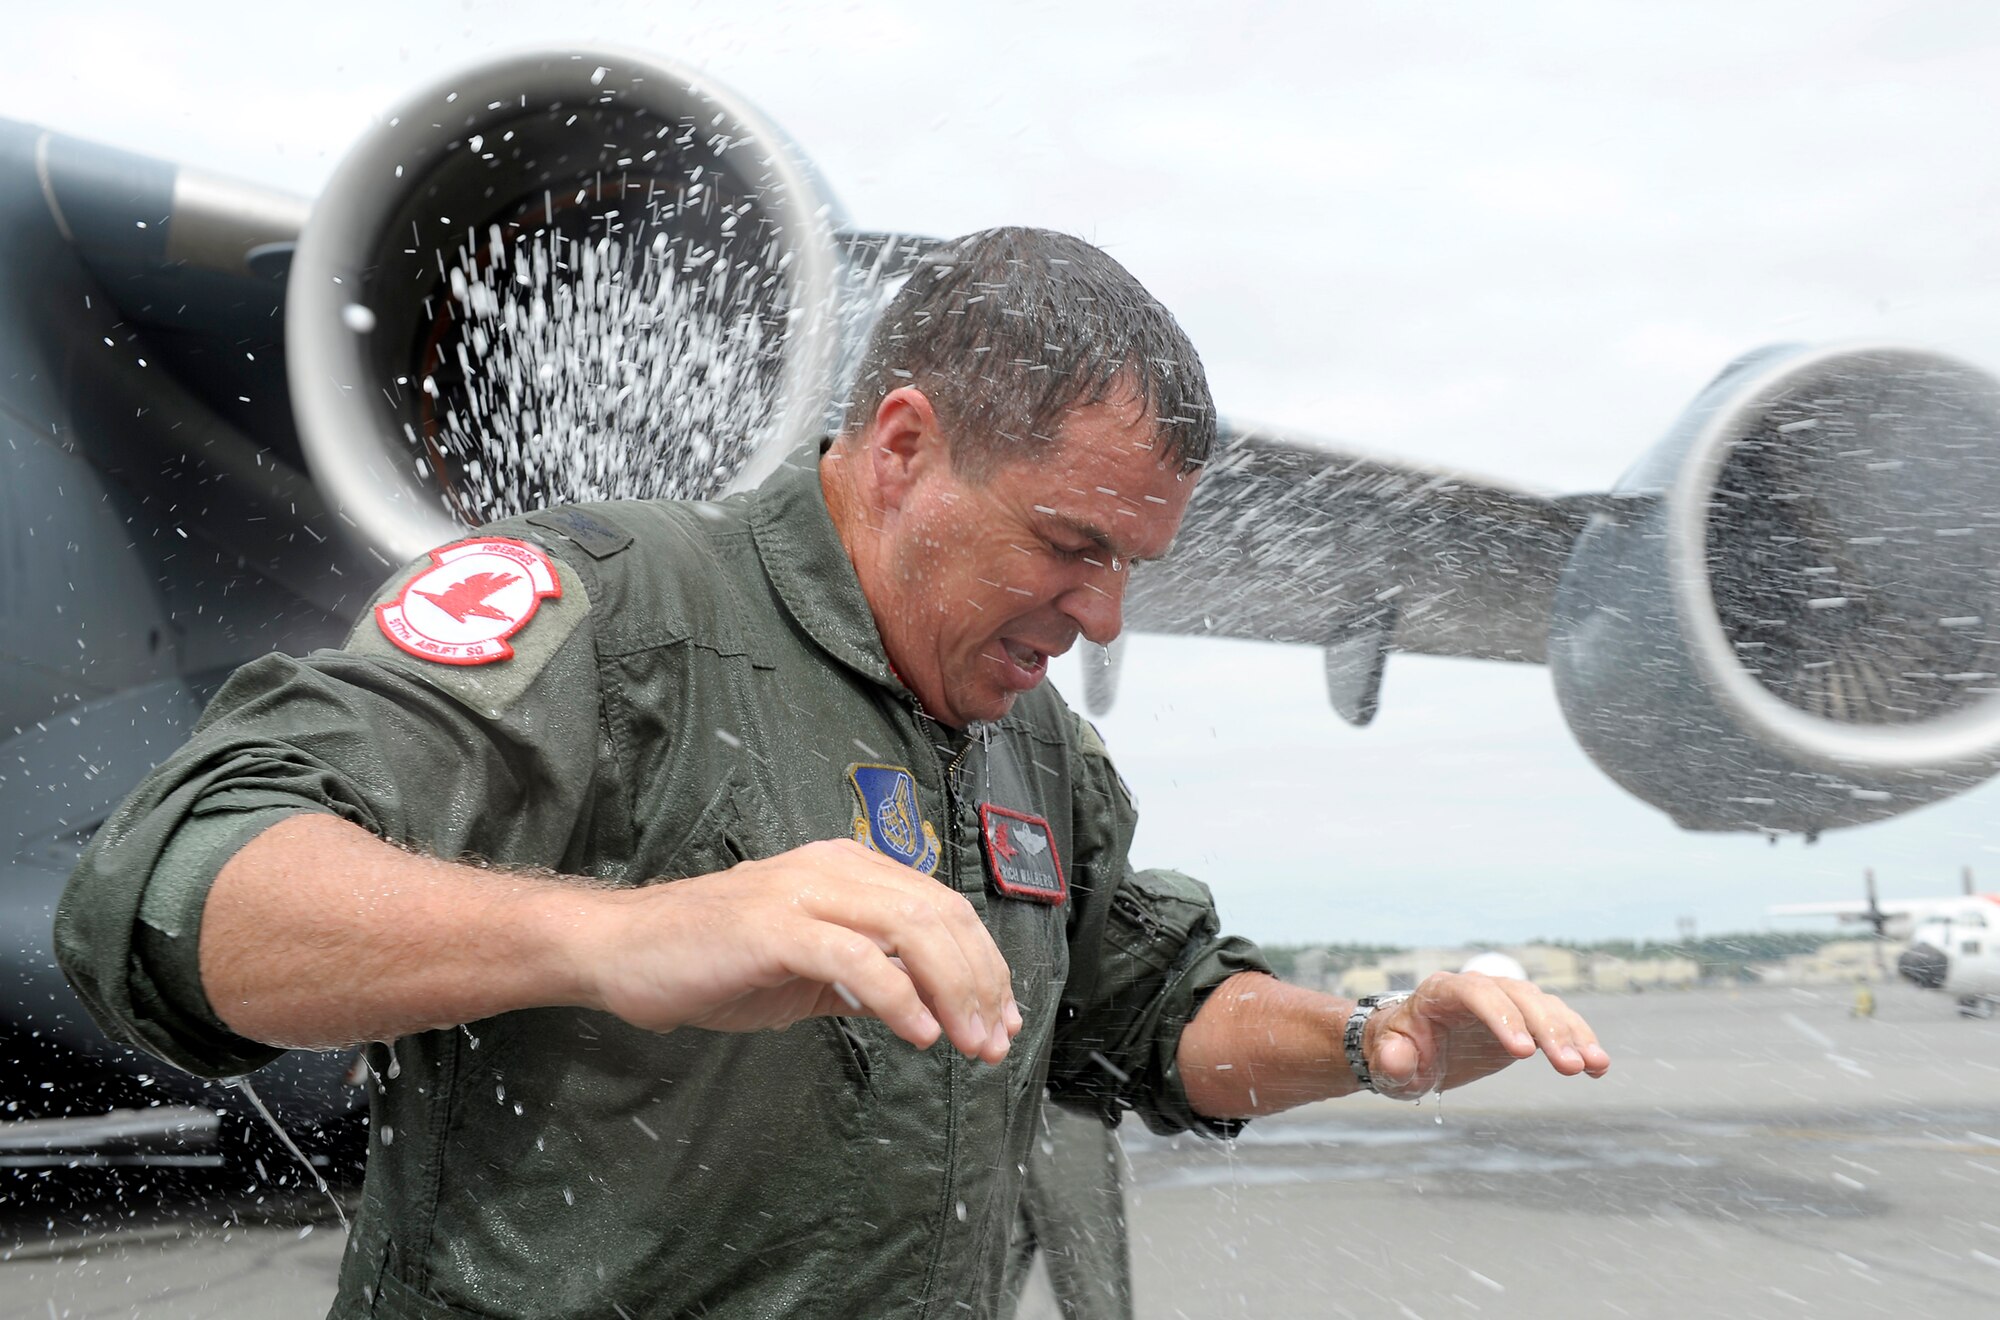 ELMENDORF AIR FORCE BASE, Alaska -- Col. Rich Walberg is doused with water after his last military flight June 16. Colonel Walberg retires from active duty June 19. His final assignment was as the 3rd Wing vice commander. (U.S. Air Force photo/Master Sgt. Keith Brown)